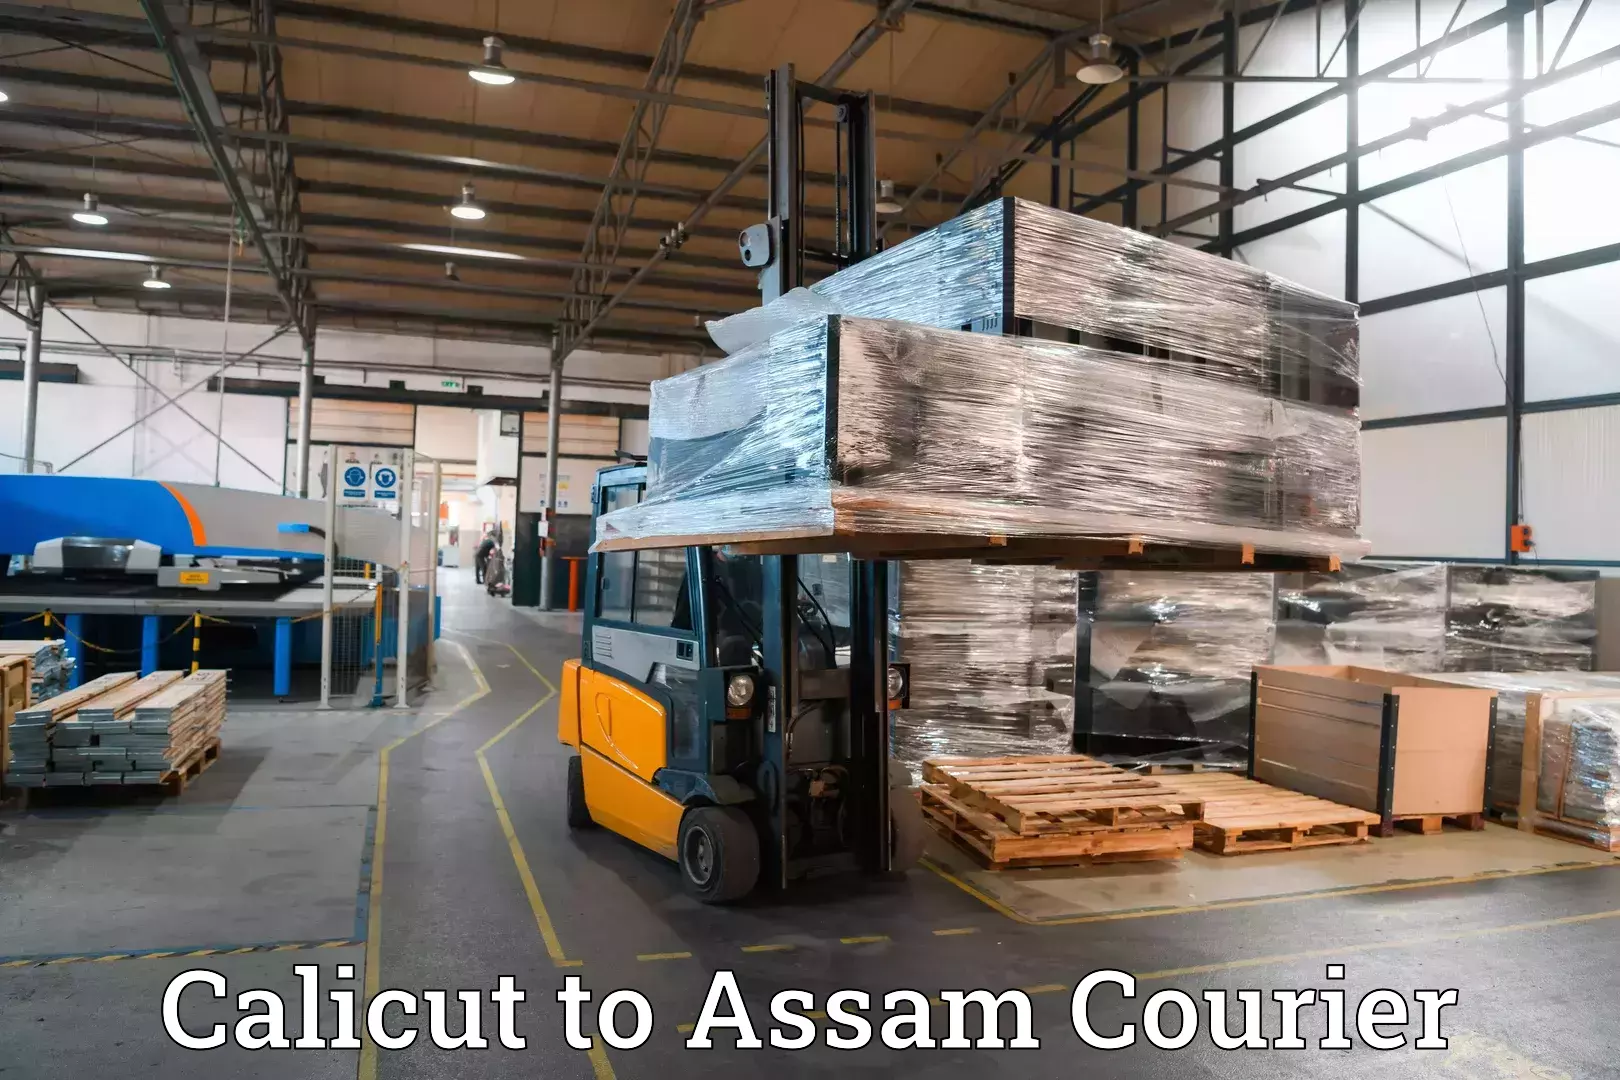 Luggage shipment specialists Calicut to Assam